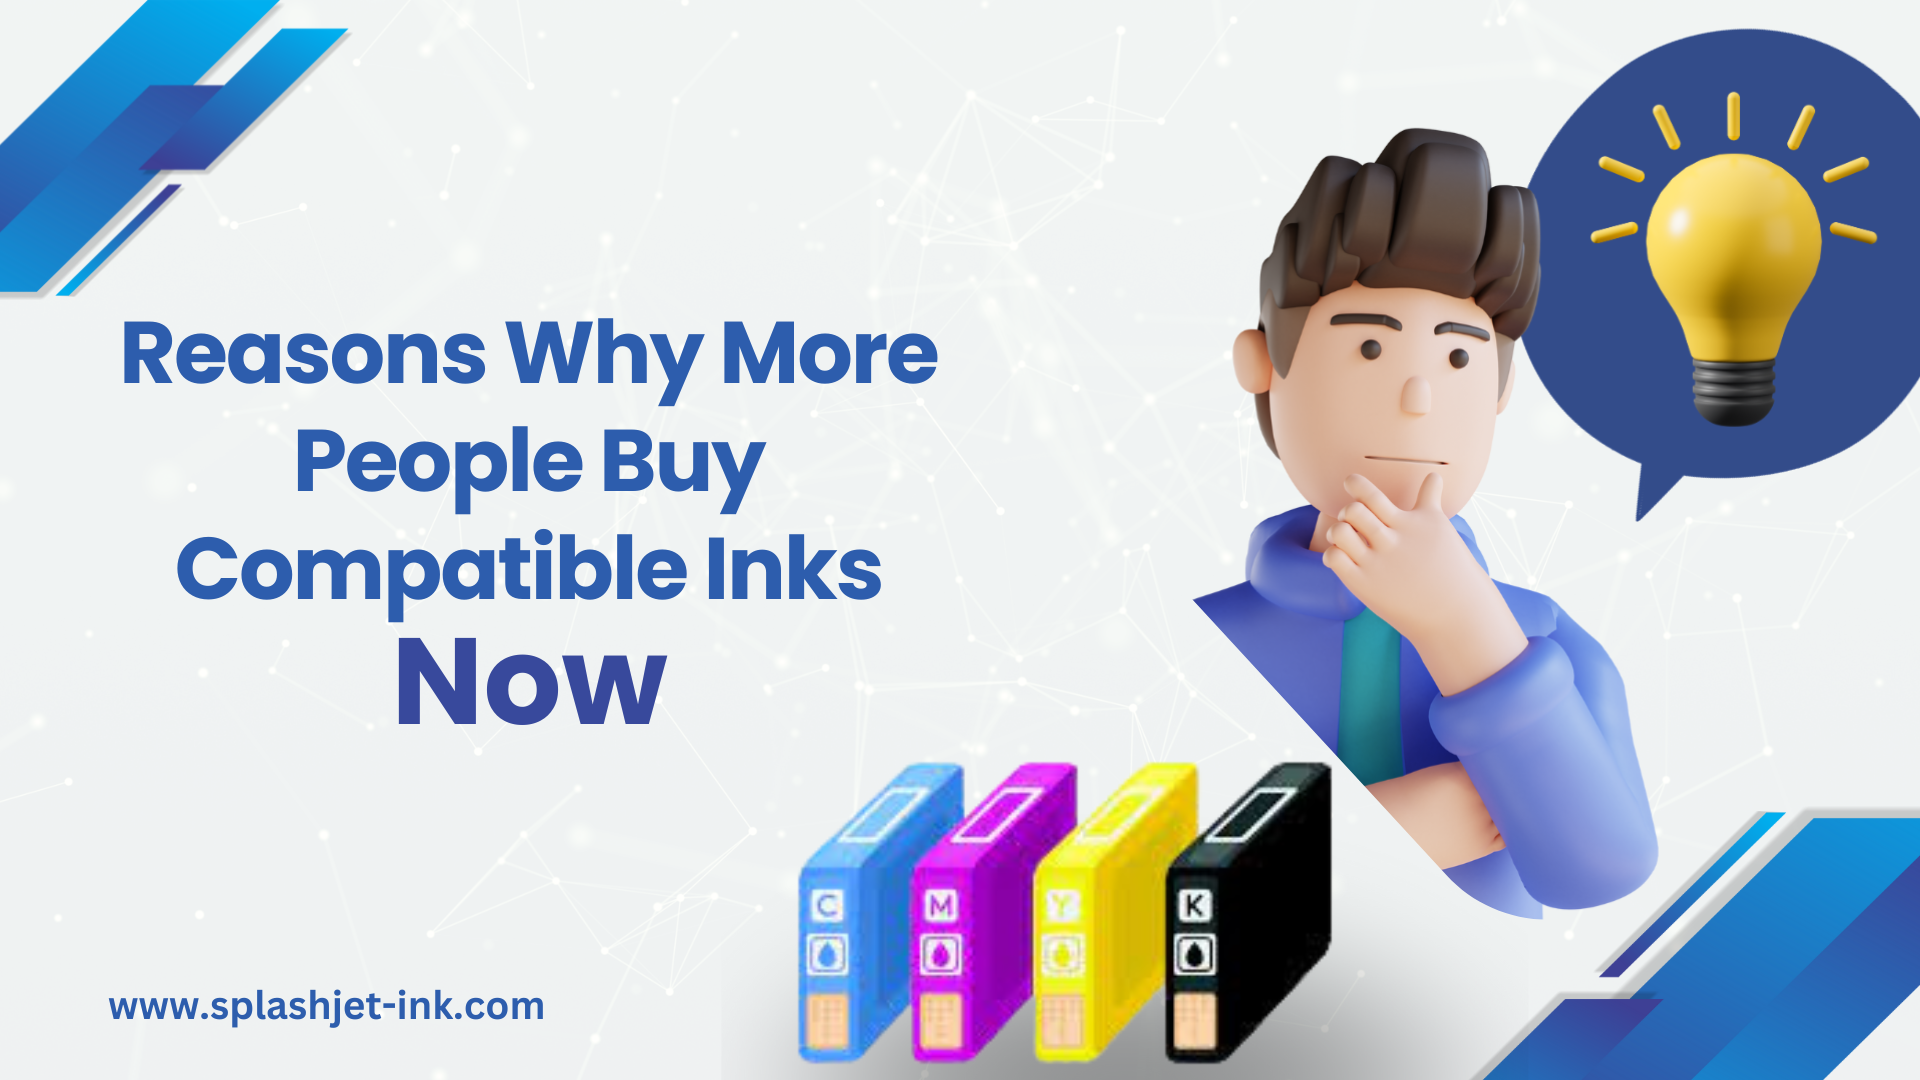 Reasons why more people buy compatible inks now